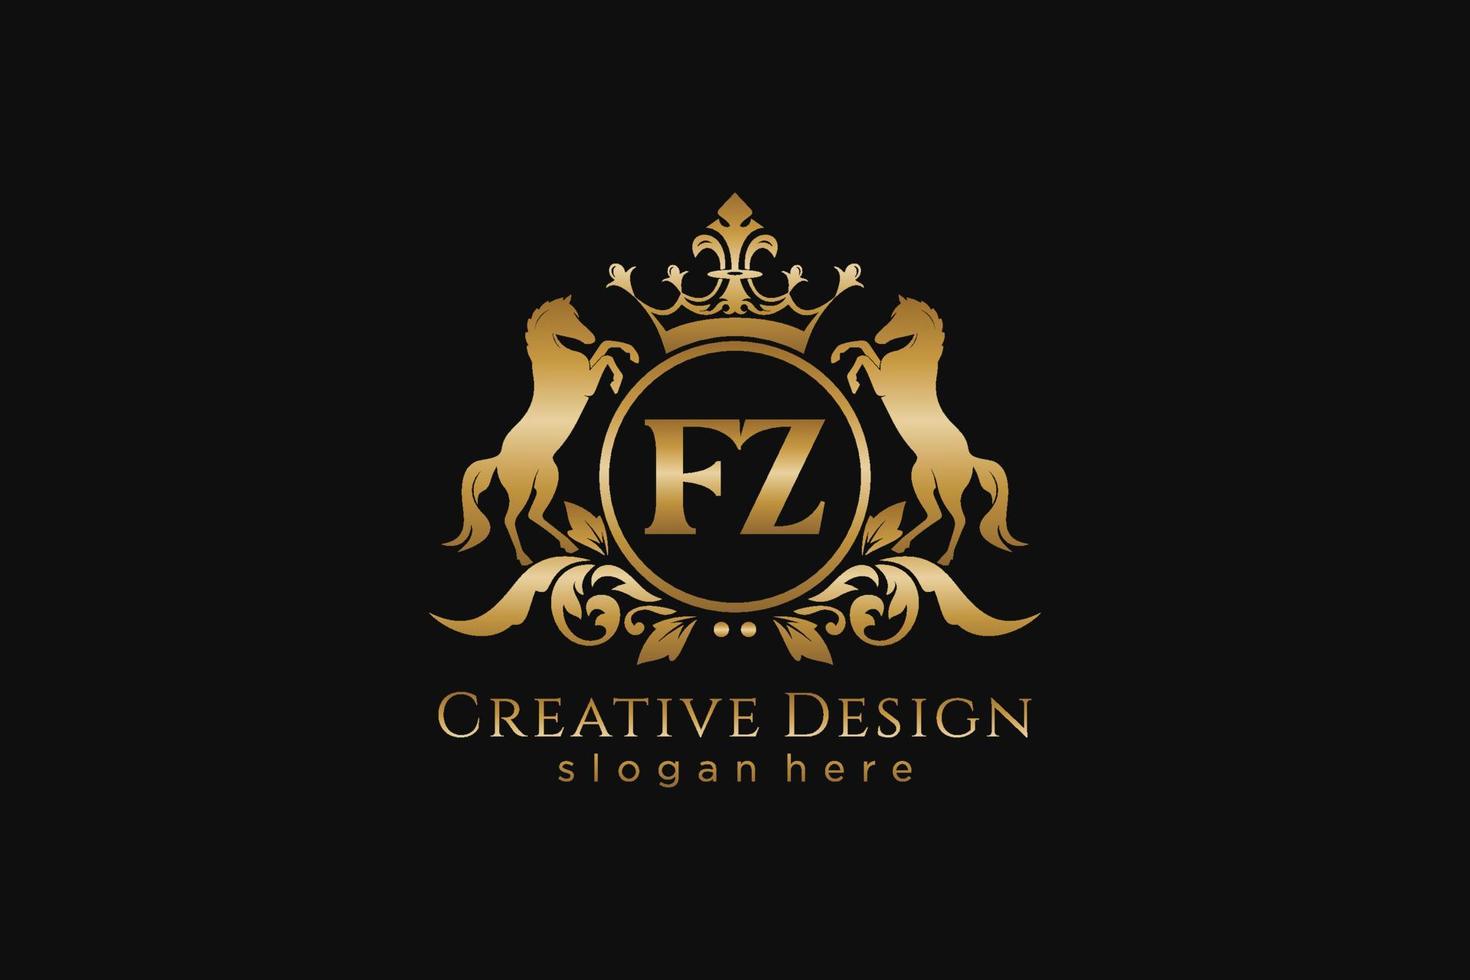 initial FZ Retro golden crest with circle and two horses, badge template with scrolls and royal crown - perfect for luxurious branding projects vector